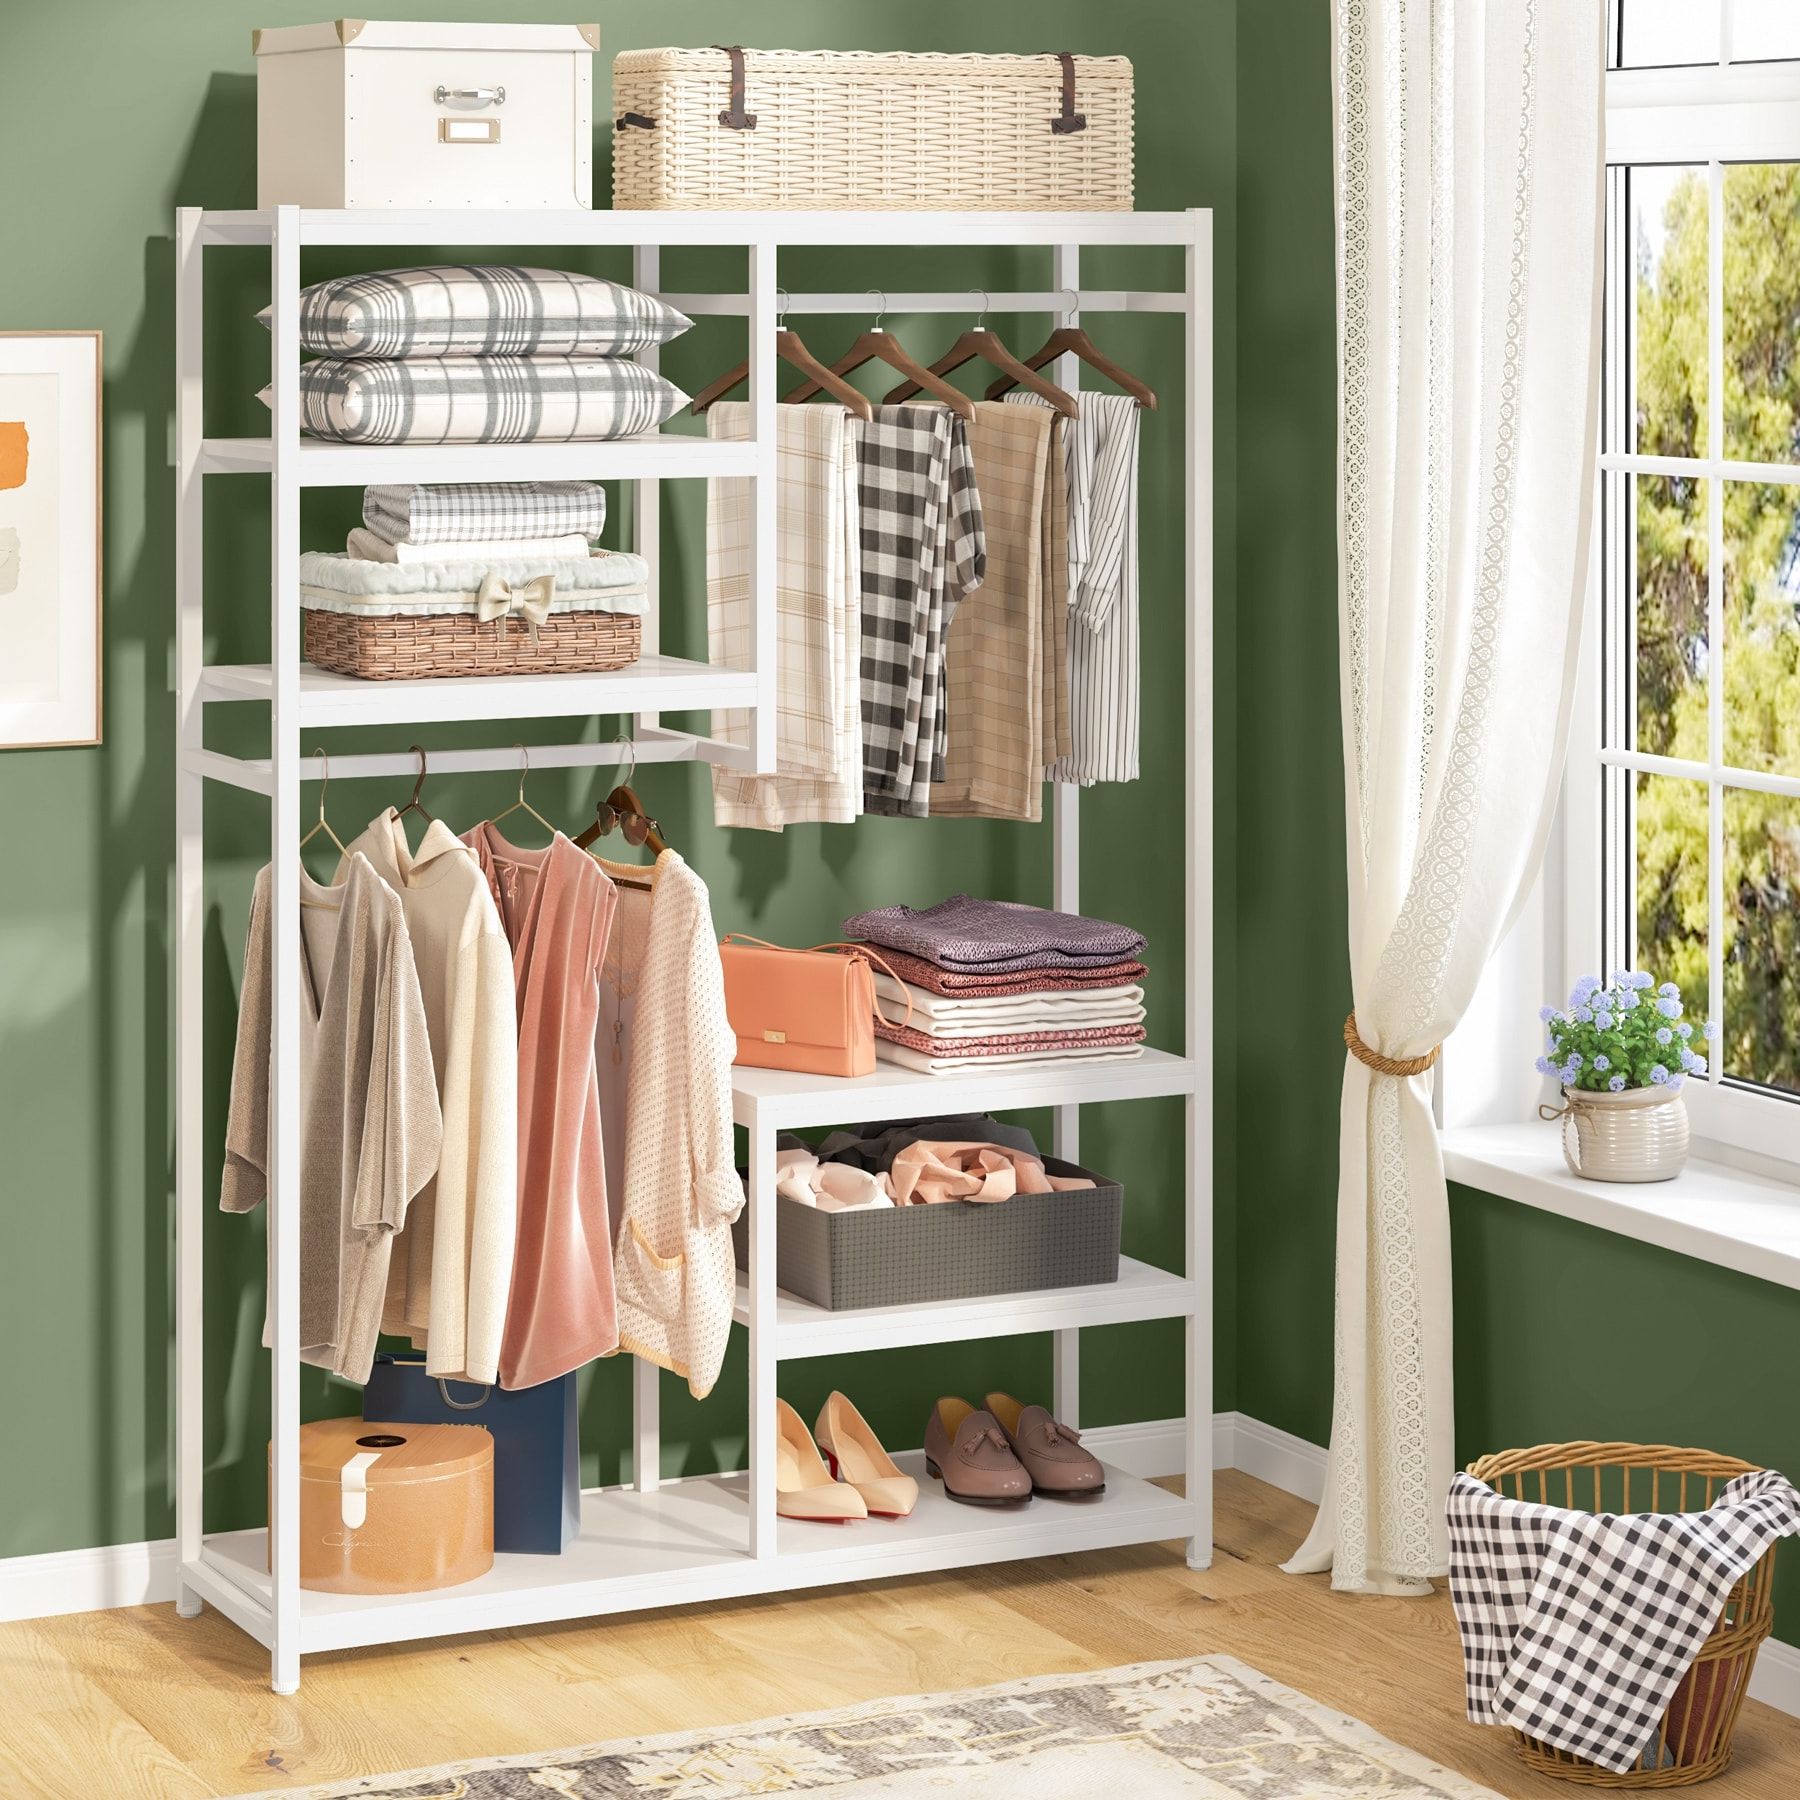 Free Standing Closet Organizer Double Hanging Rod Clothes Garment Racks –  Bed Bath & Beyond – 30537676 For Standing Closet Clothes Storage Wardrobes (View 17 of 20)